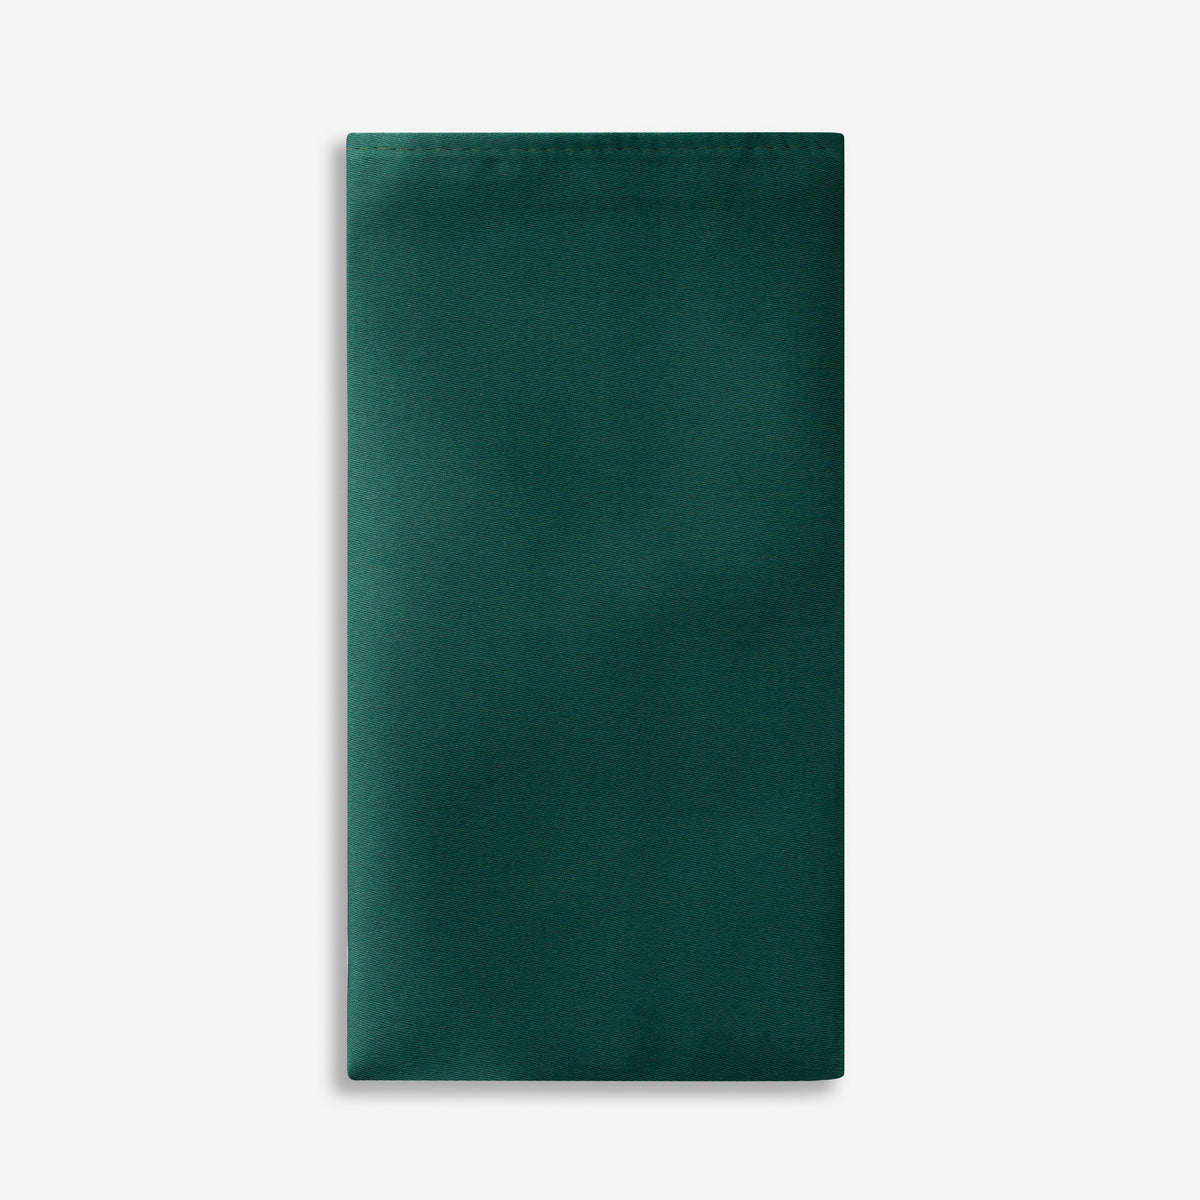 Green and Keen Pocket Square